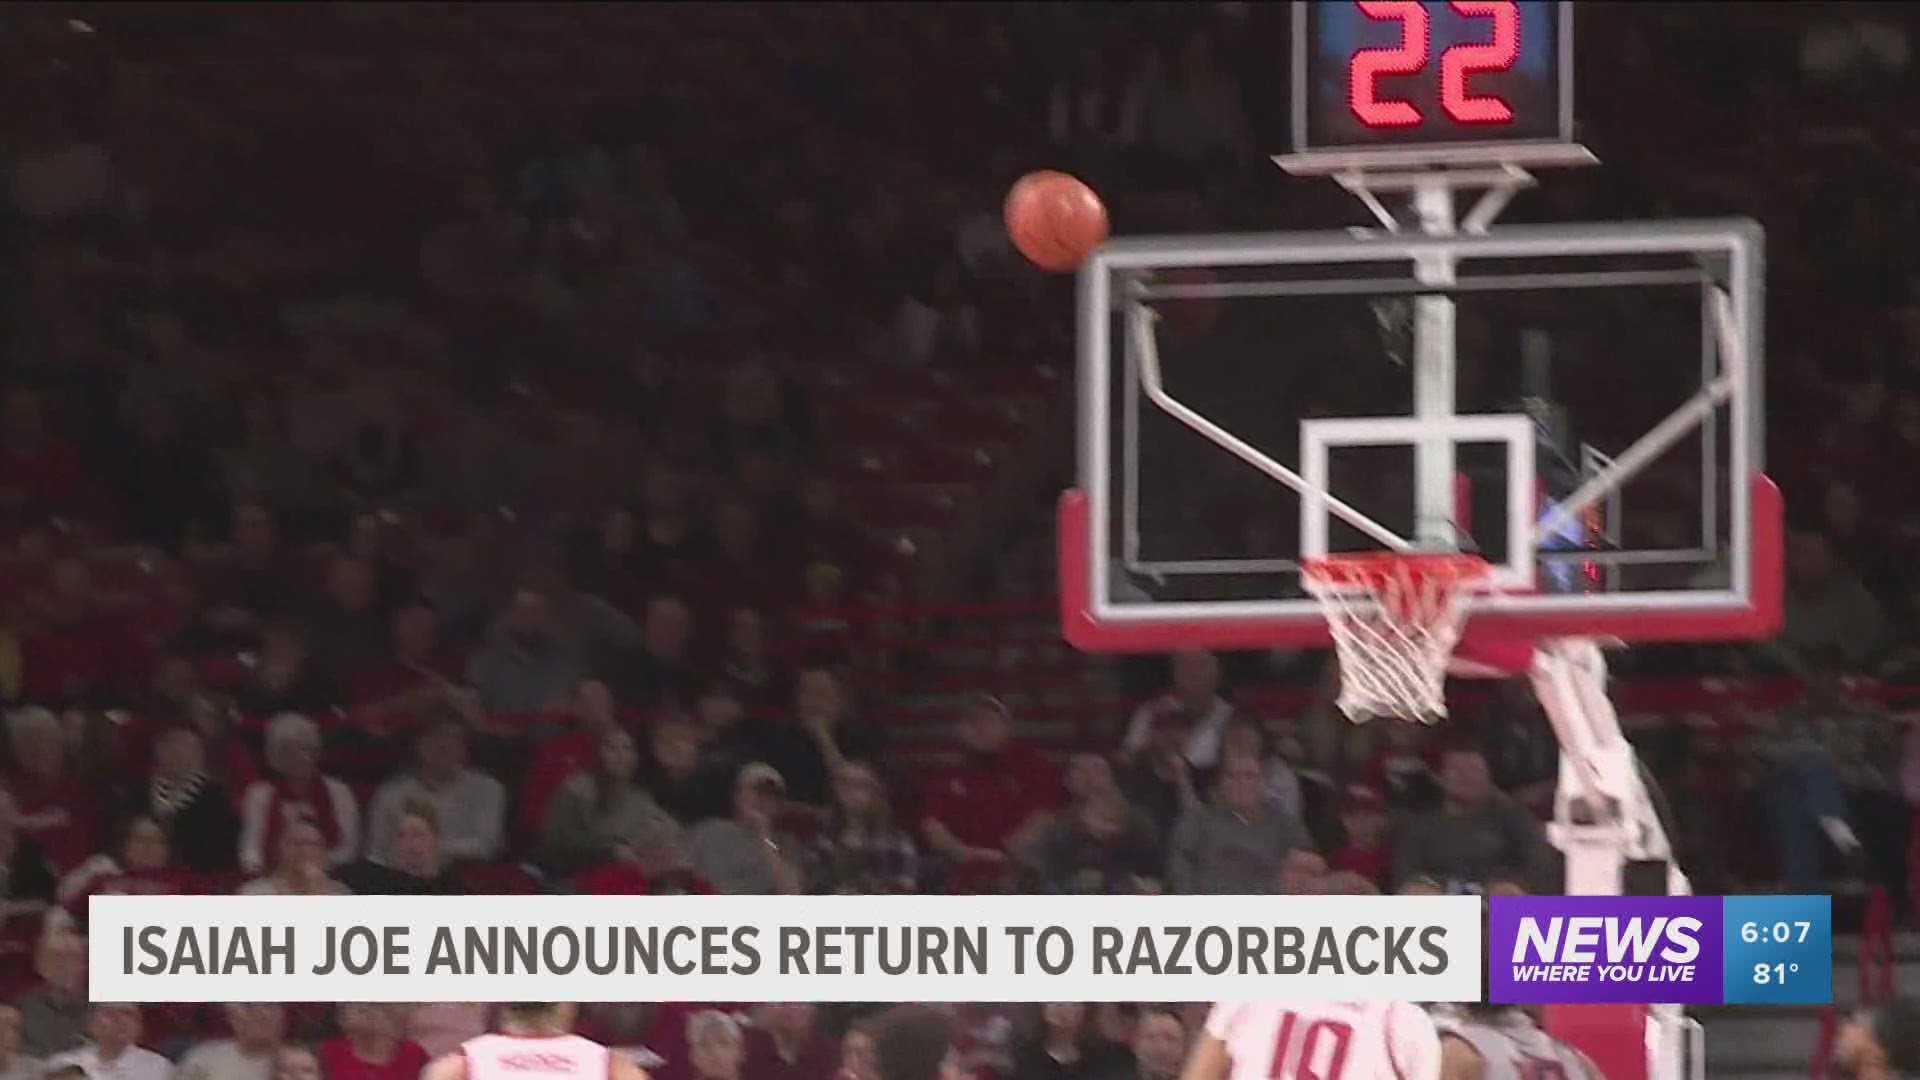 Arkansas guard Isaiah Joe announced that he will withdraw his name from the 2020 NBA Draft and return to the Hogs for his junior season. https://bit.ly/39PjLnj